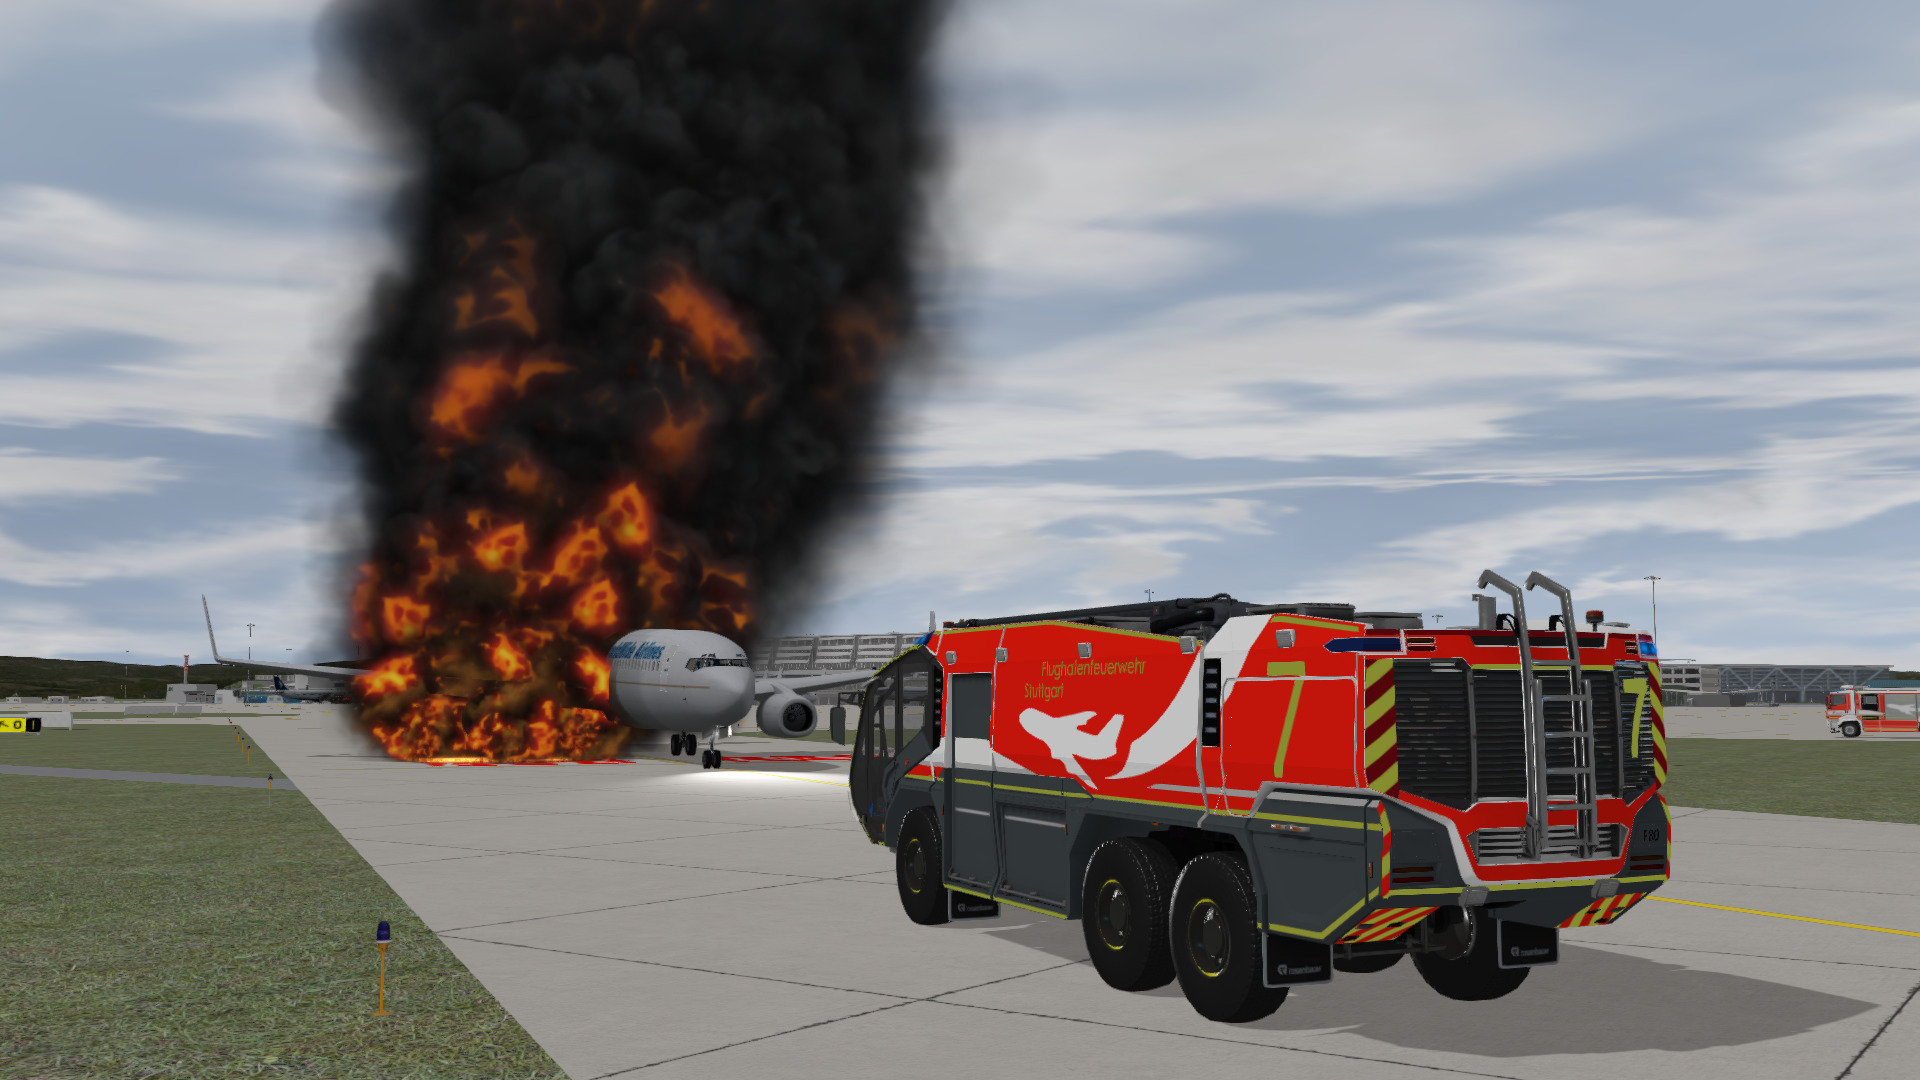 Rosenbauer Panther ARFF Truck responding to a massive fuel fire underneath a 737, inside the training system.